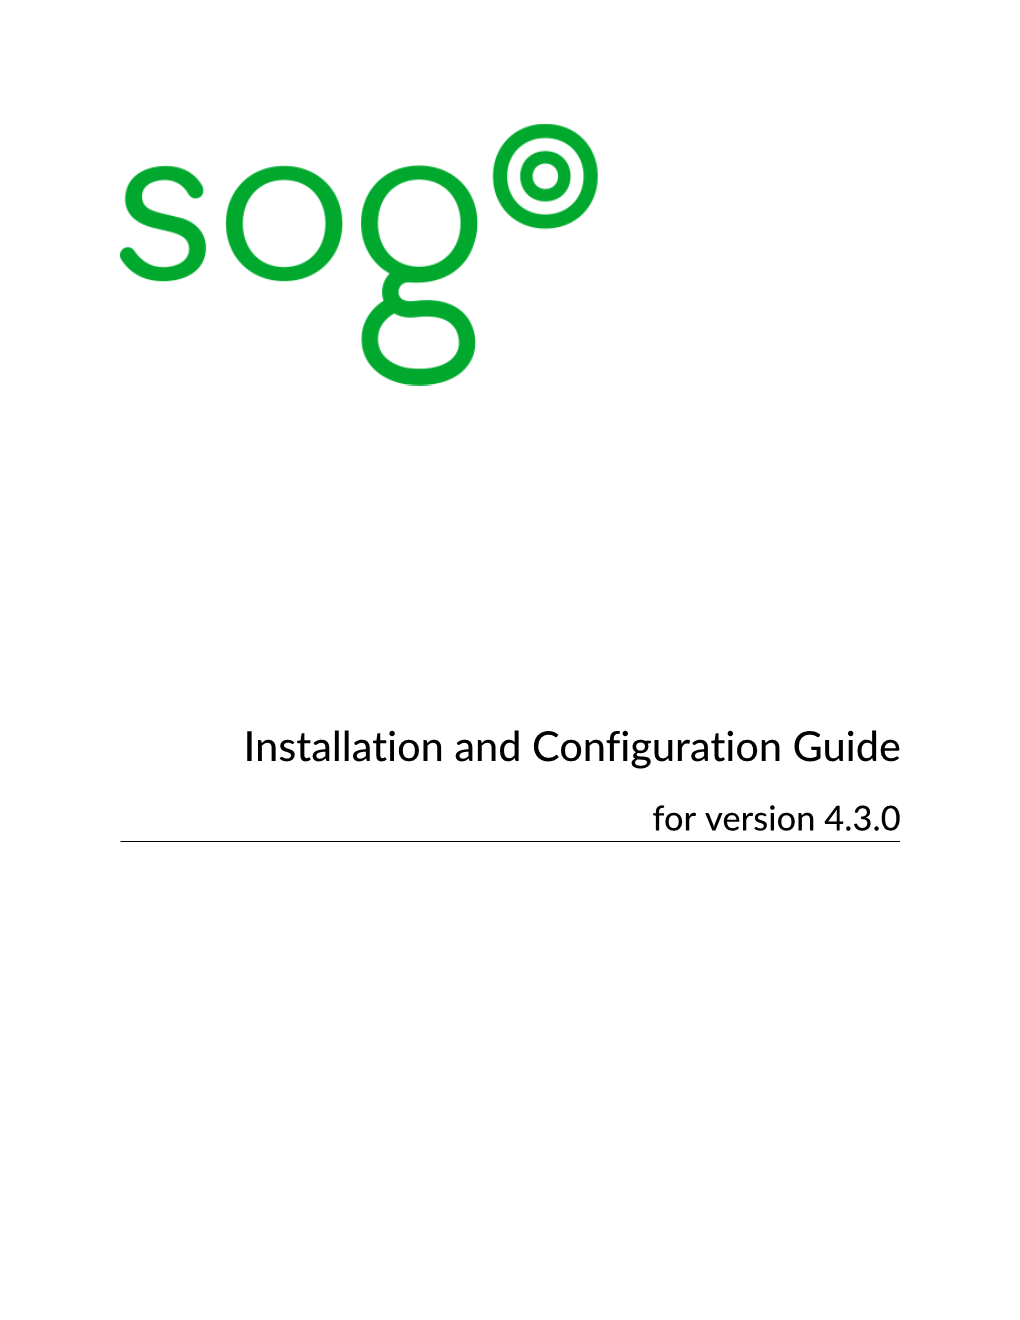 Installation and Configuration Guide for Version 4.3.0 Installation and Configuration Guide Version 4.3.0 - January 2020